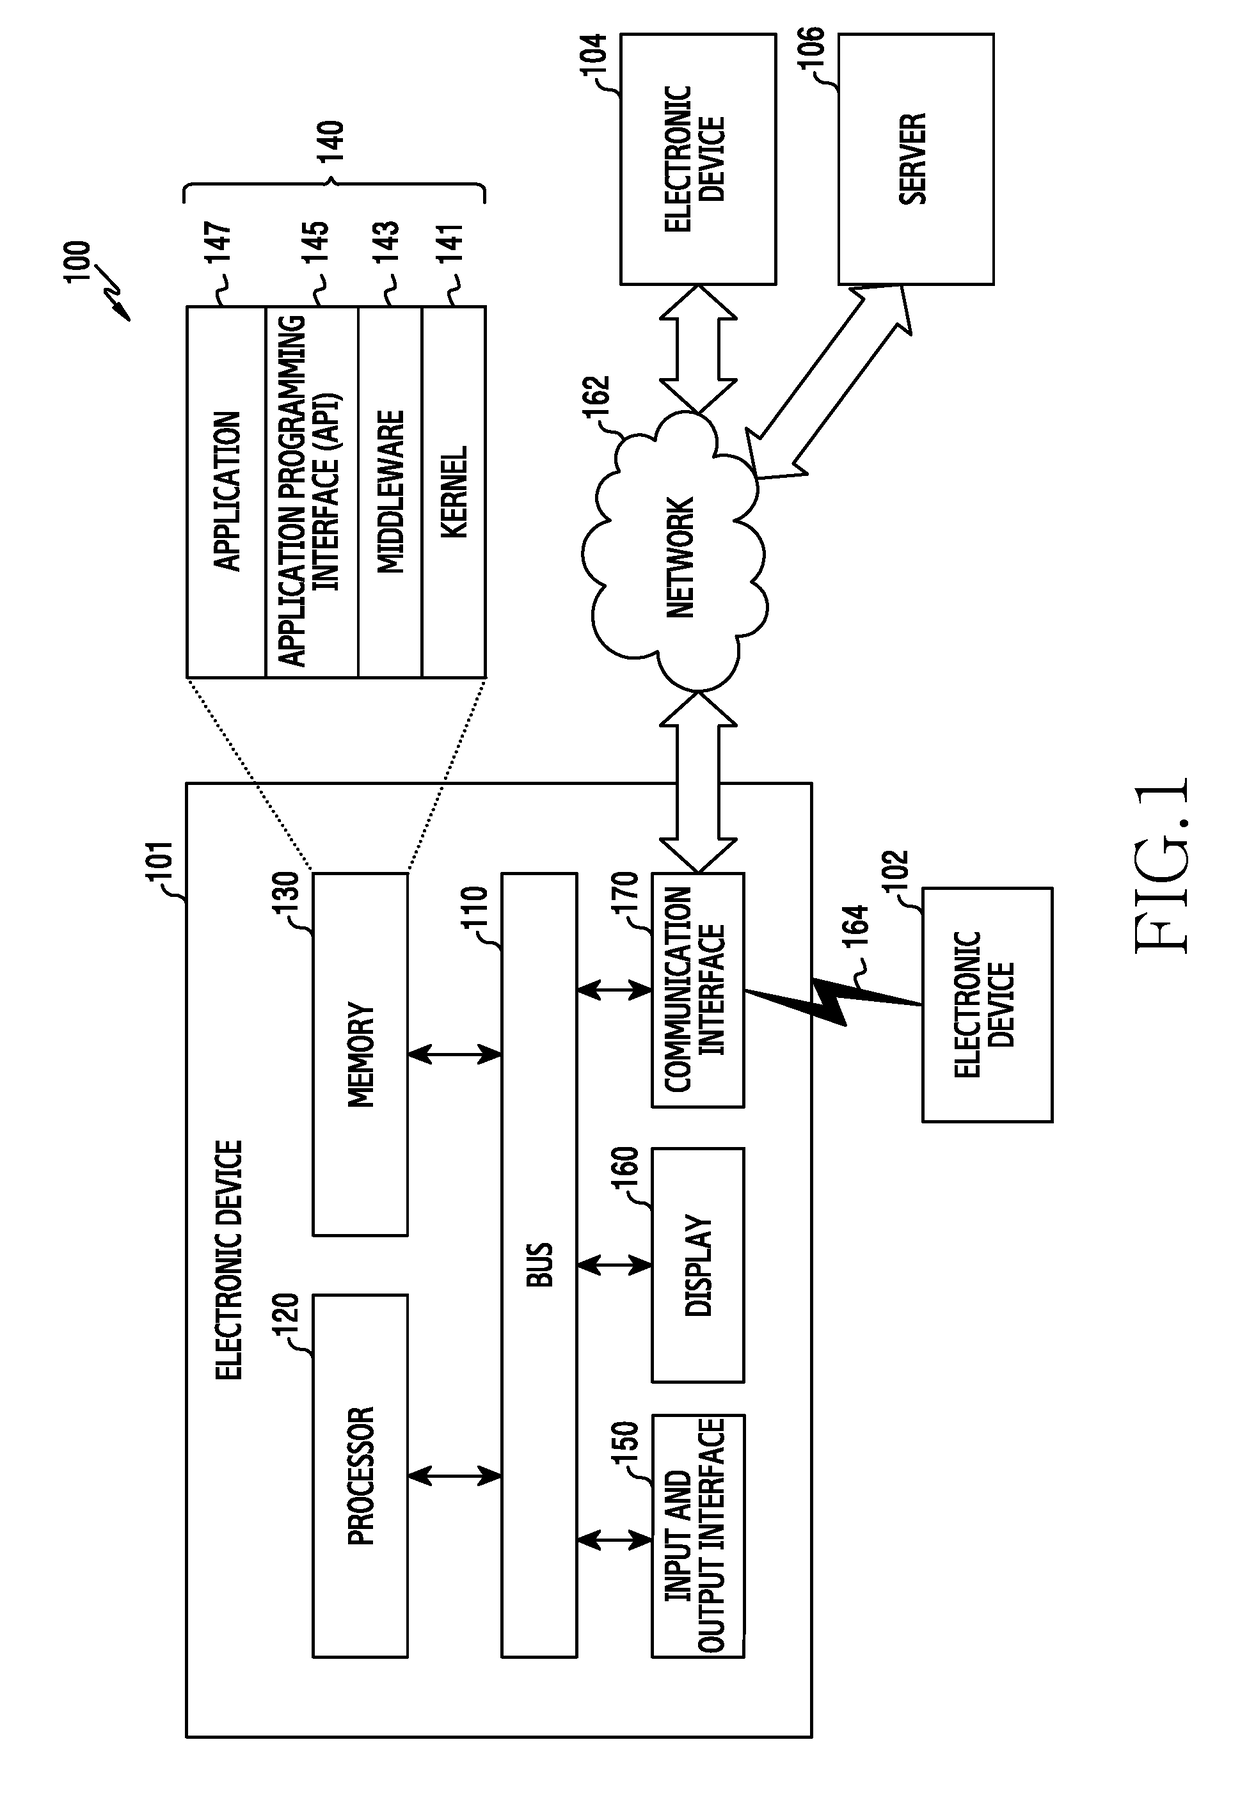 Electronic device and method for providing route information